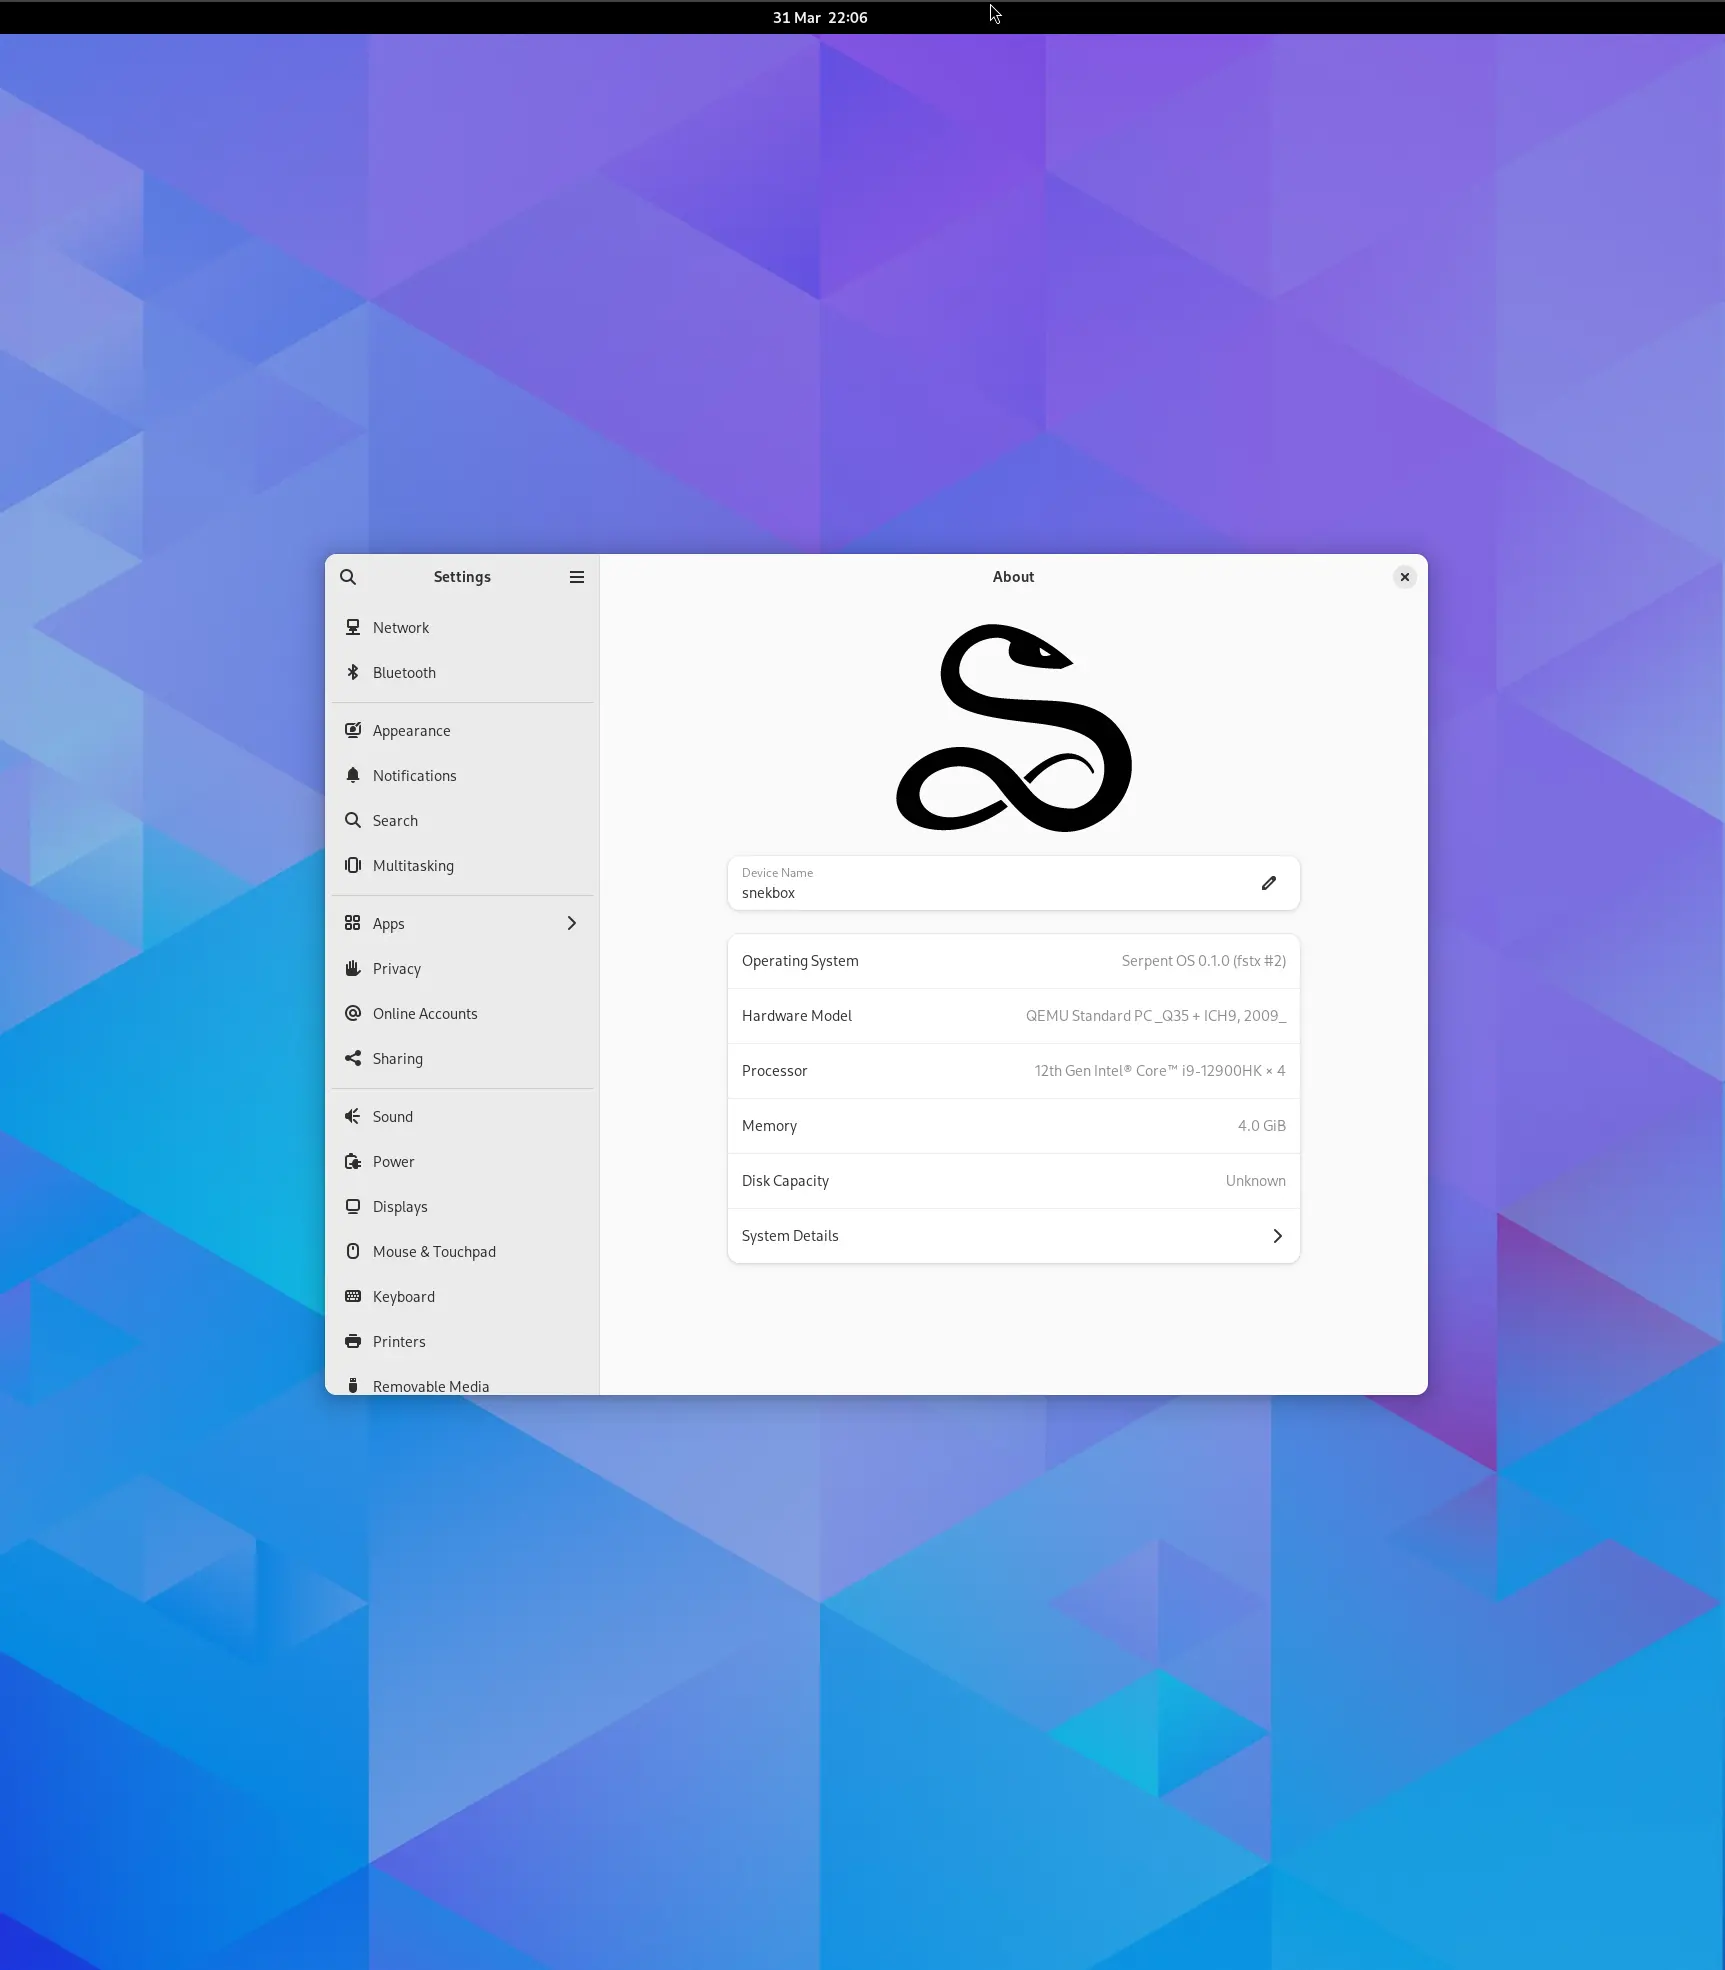 GNOME on Serpent OS